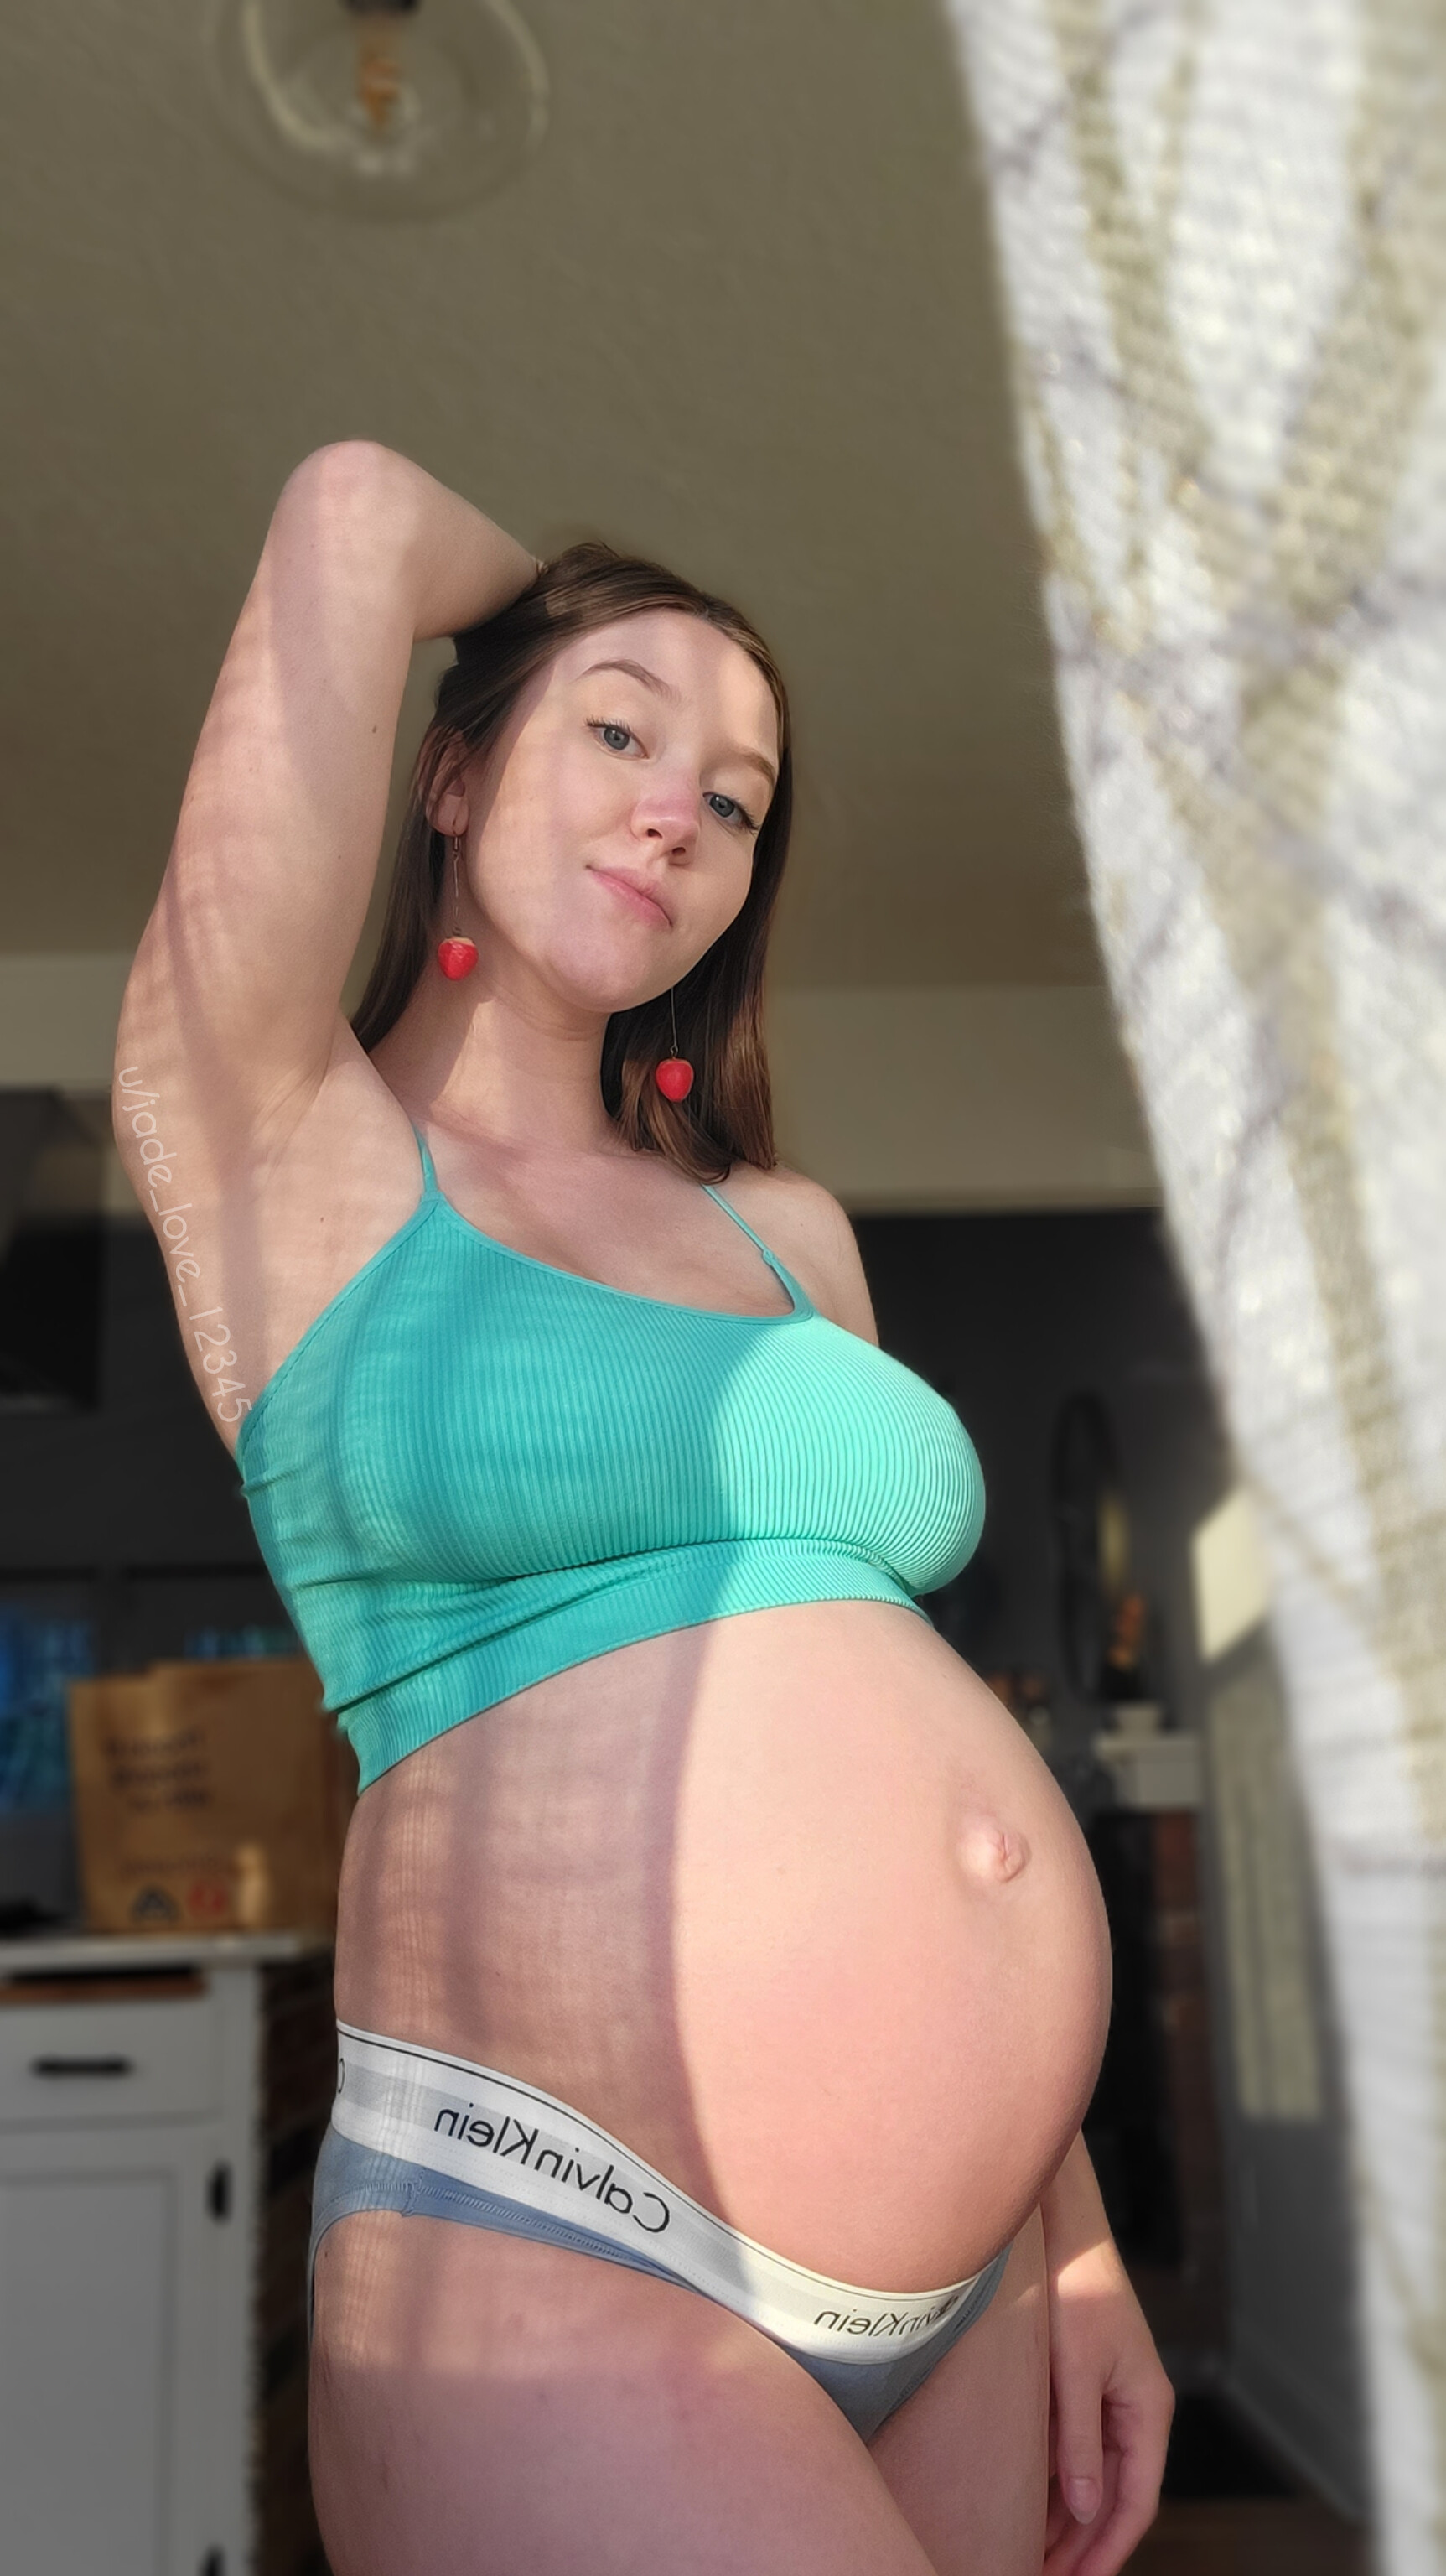 Going braless at 9 months pregnant